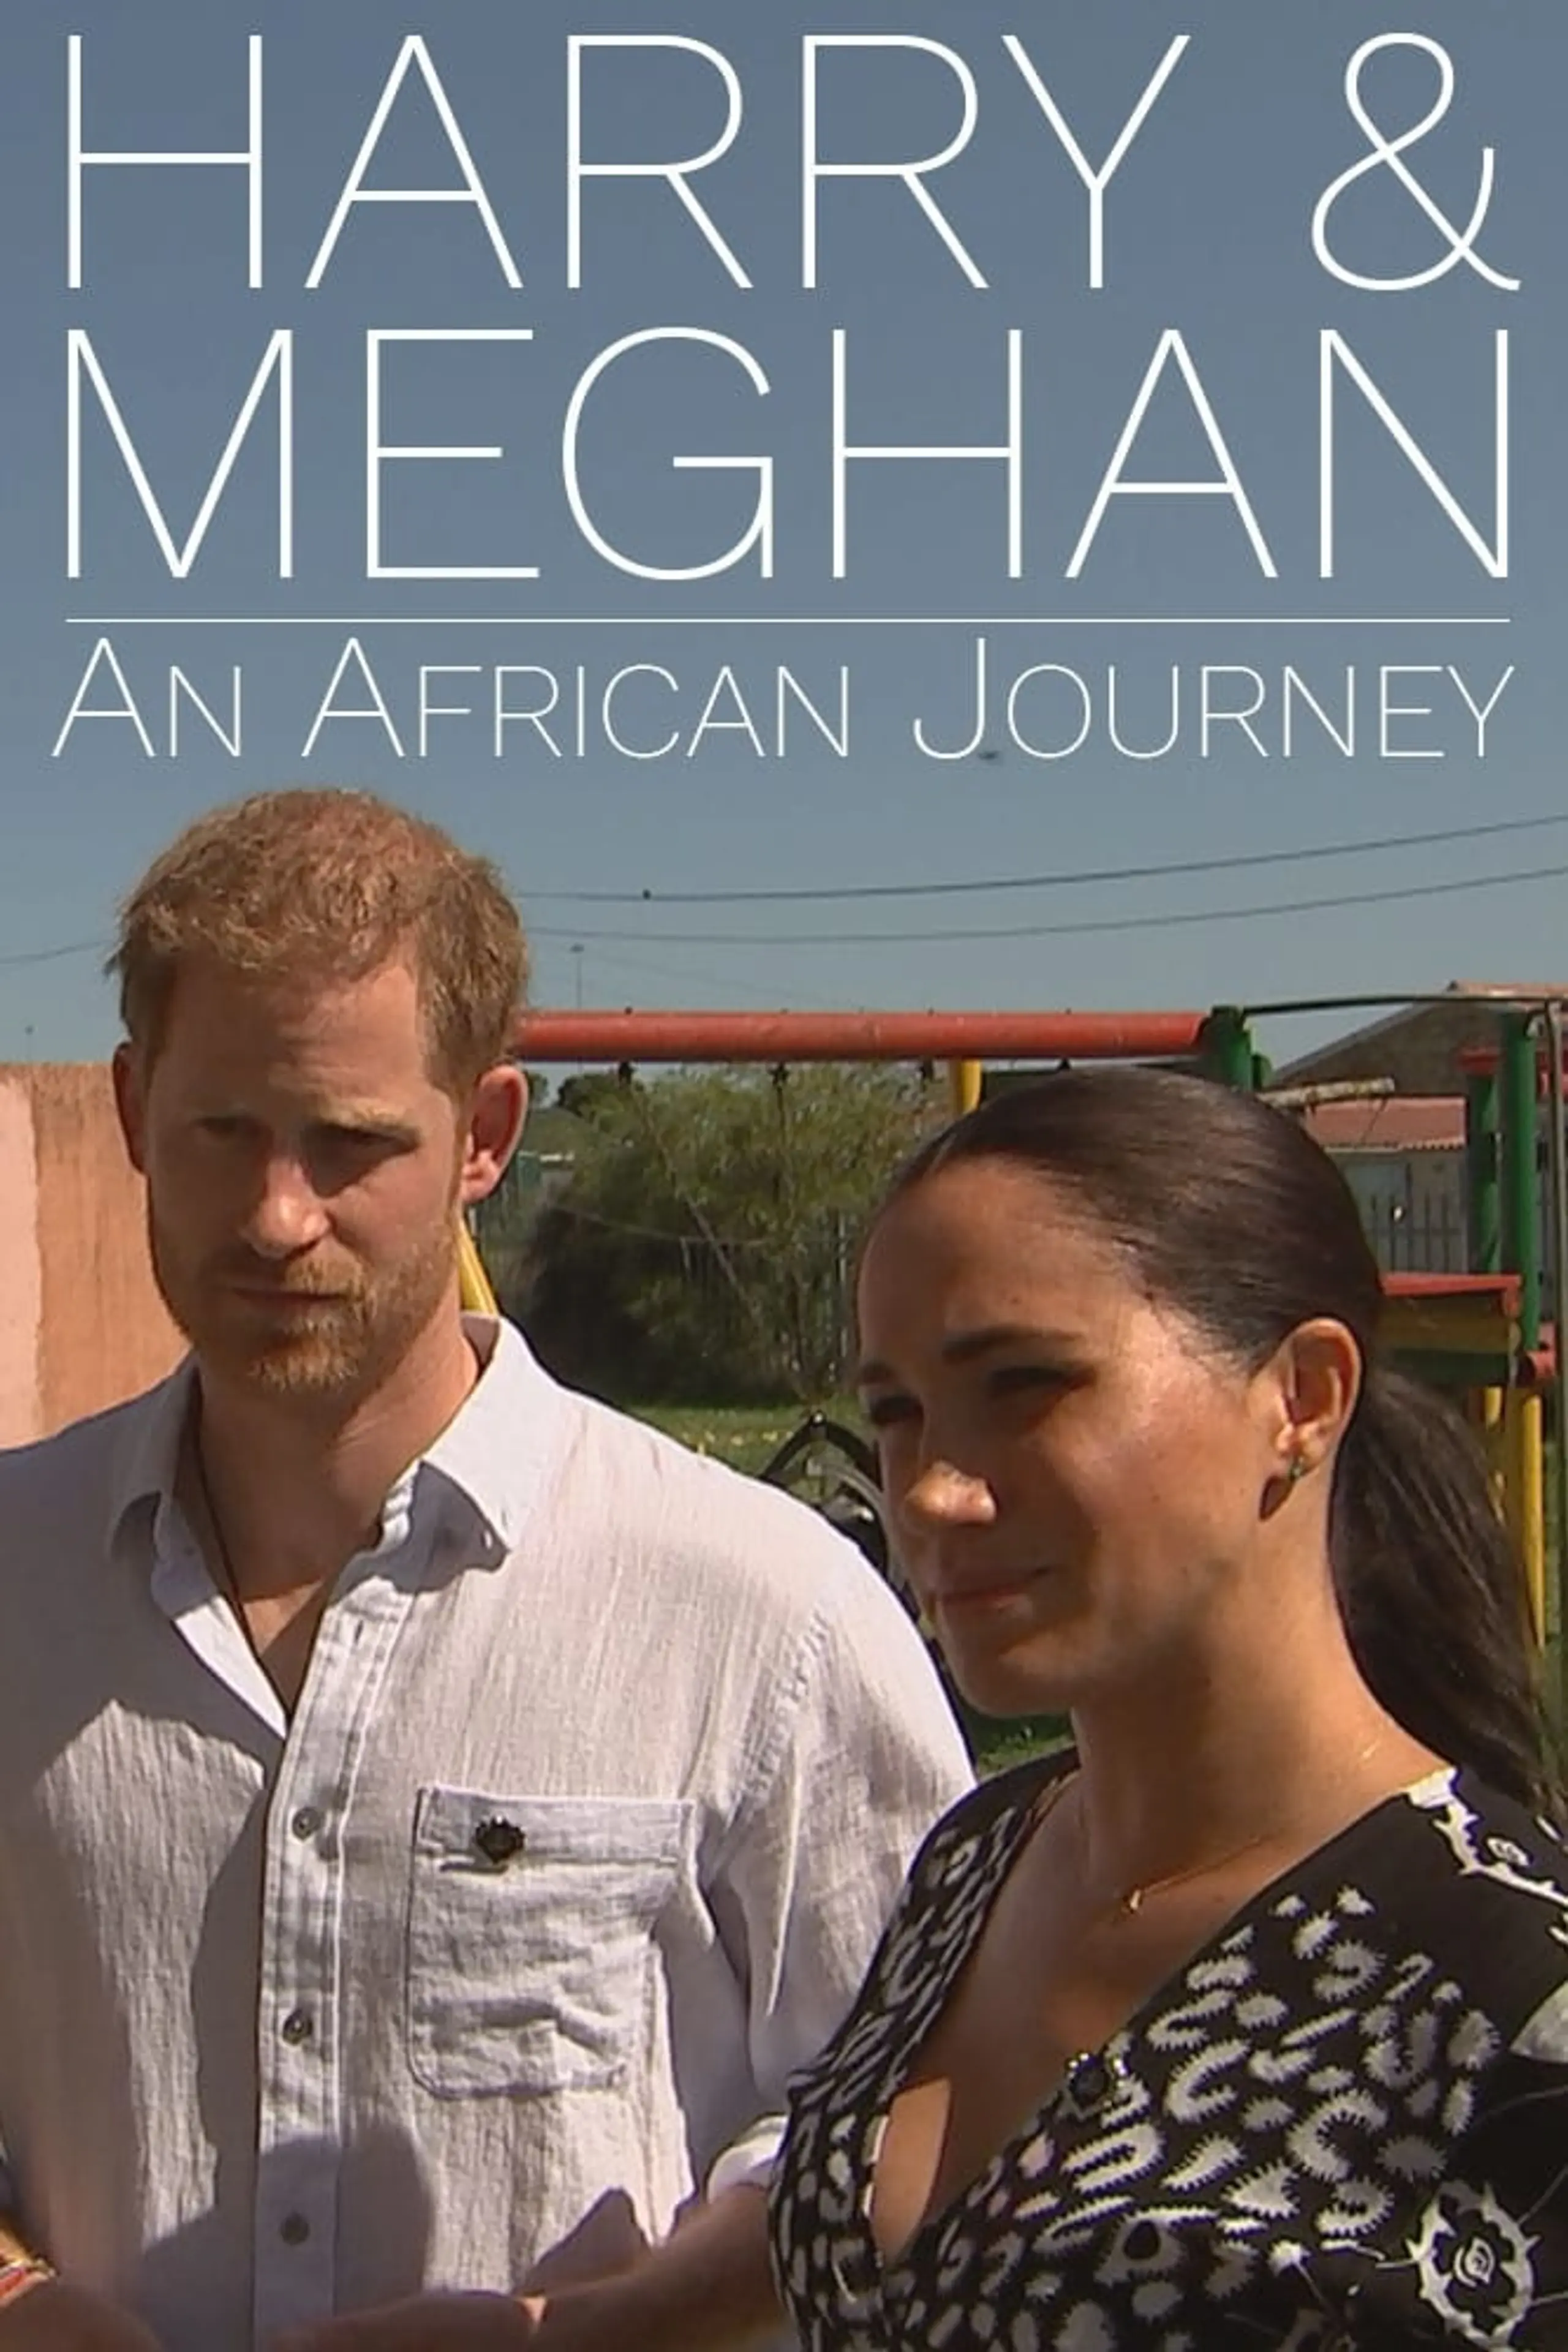 Harry and Meghan: An African Journey